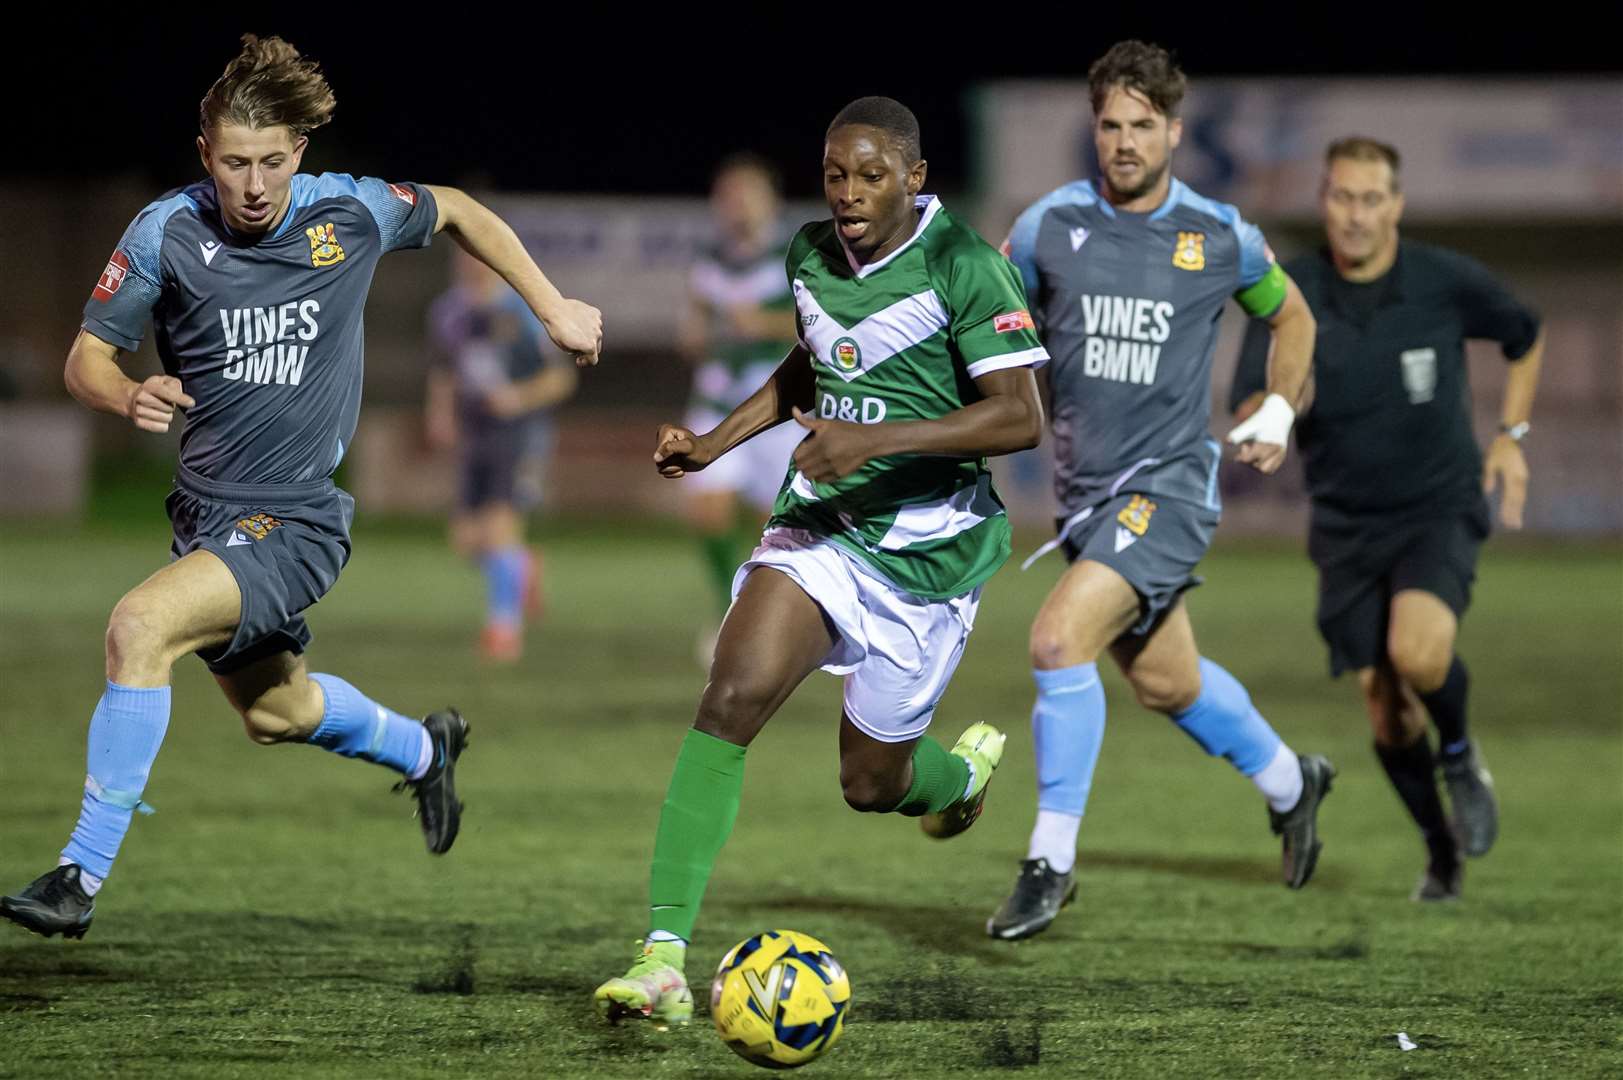 Lanre Azeez runs at the Three Bridges defence on Tuesday night. Picture: Ian Scammell